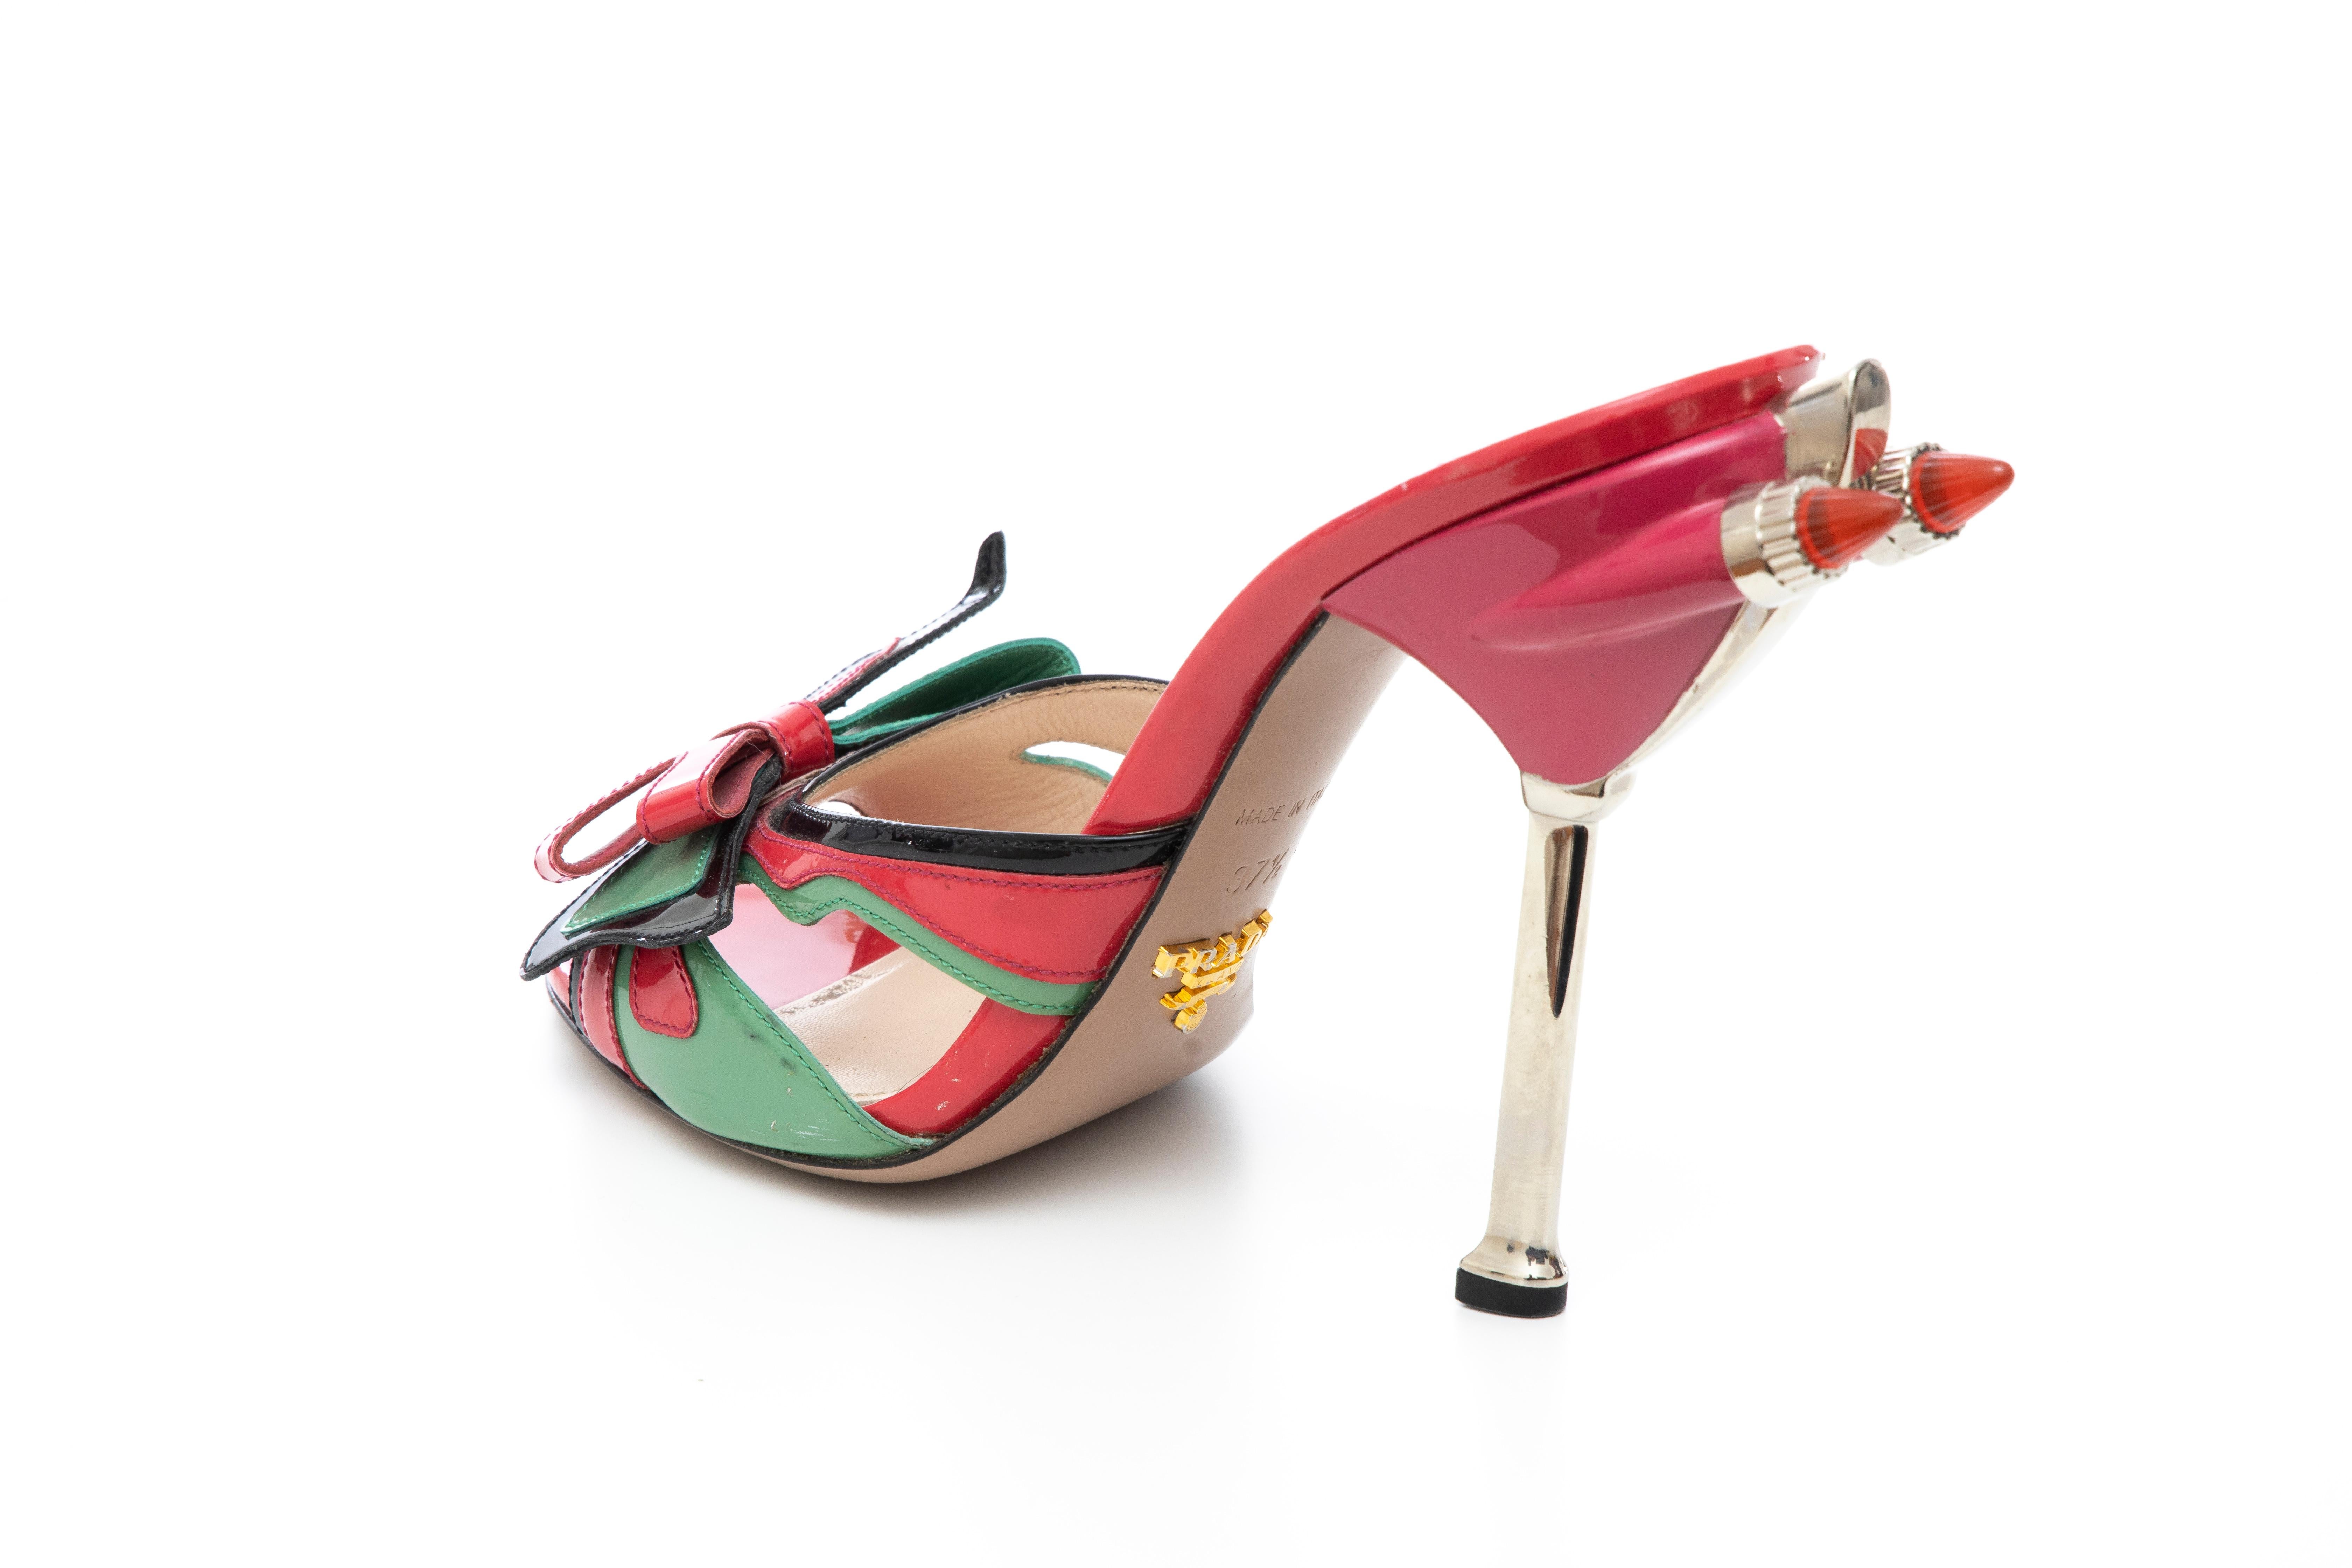 Prada Runway Patent Leather Tail Light Sandal, Spring 2012 For Sale 4